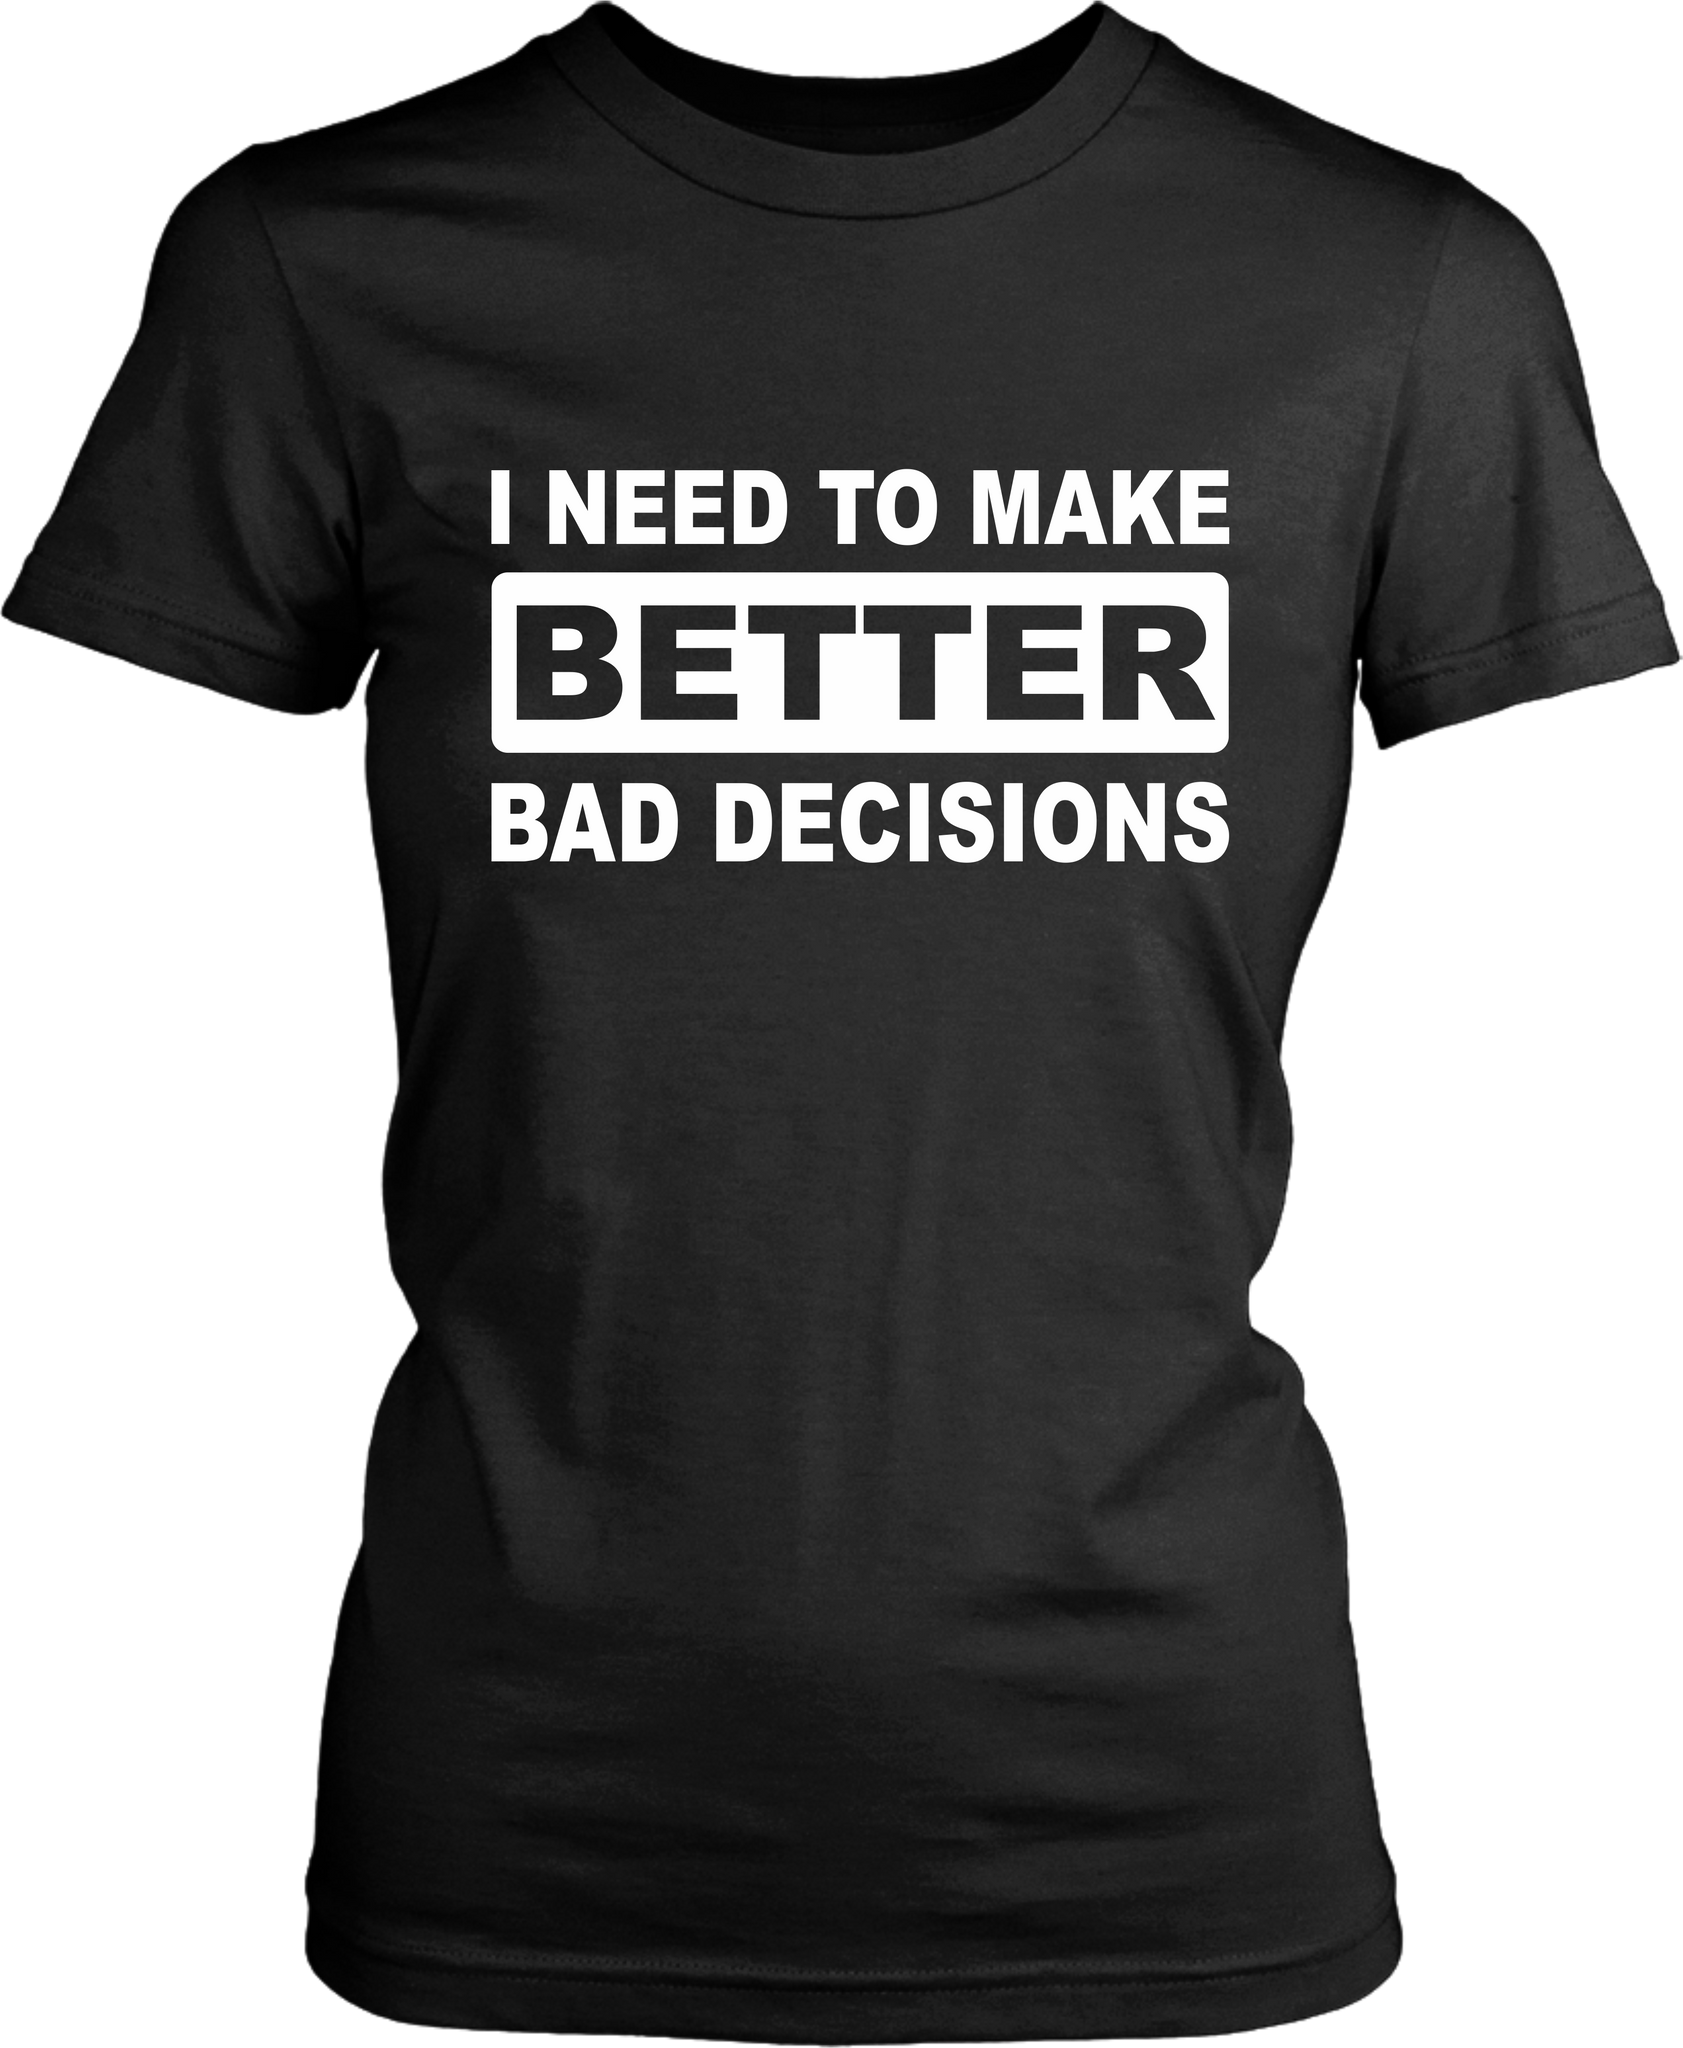 Funny***. "I NEED TO MAKE BETTER BAD DECISIONS" T-shirt Summer Casual sarcastic saying